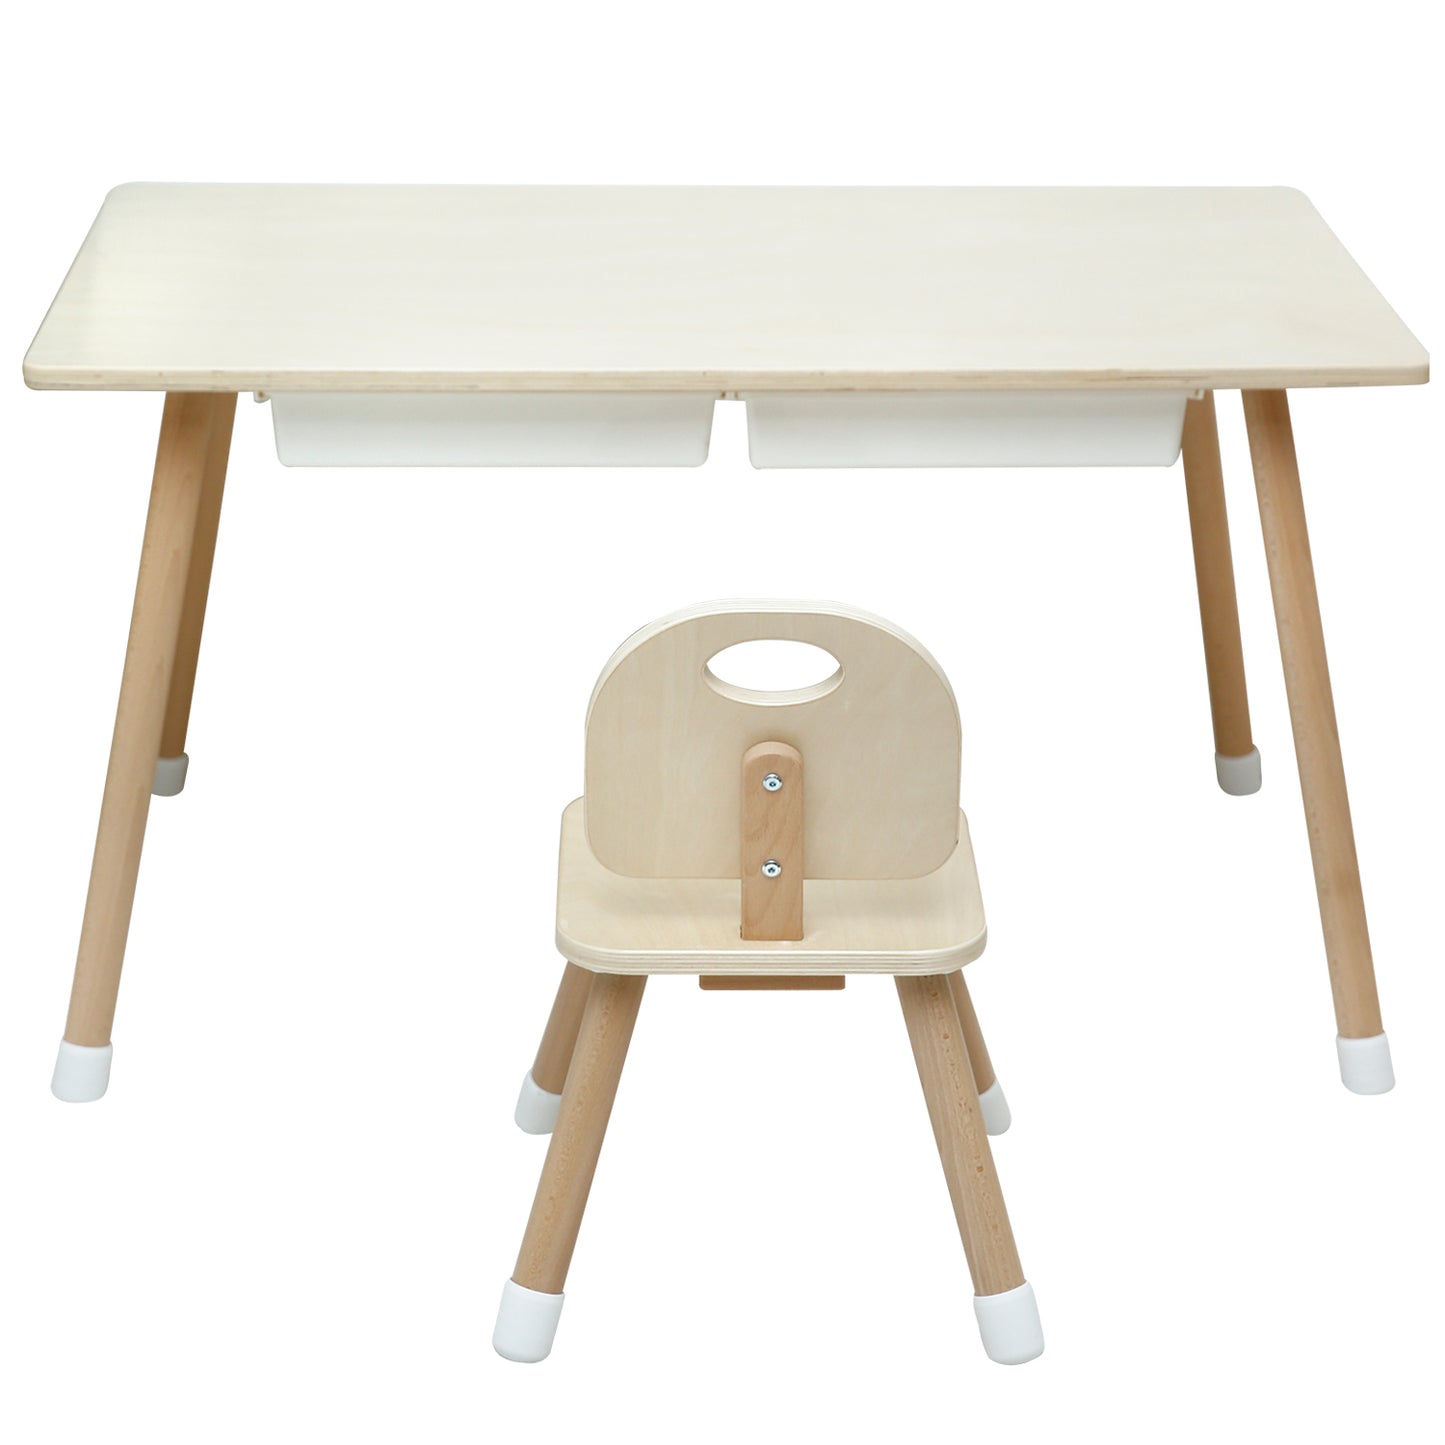 Maestro Bebe - Learning table and Chair set